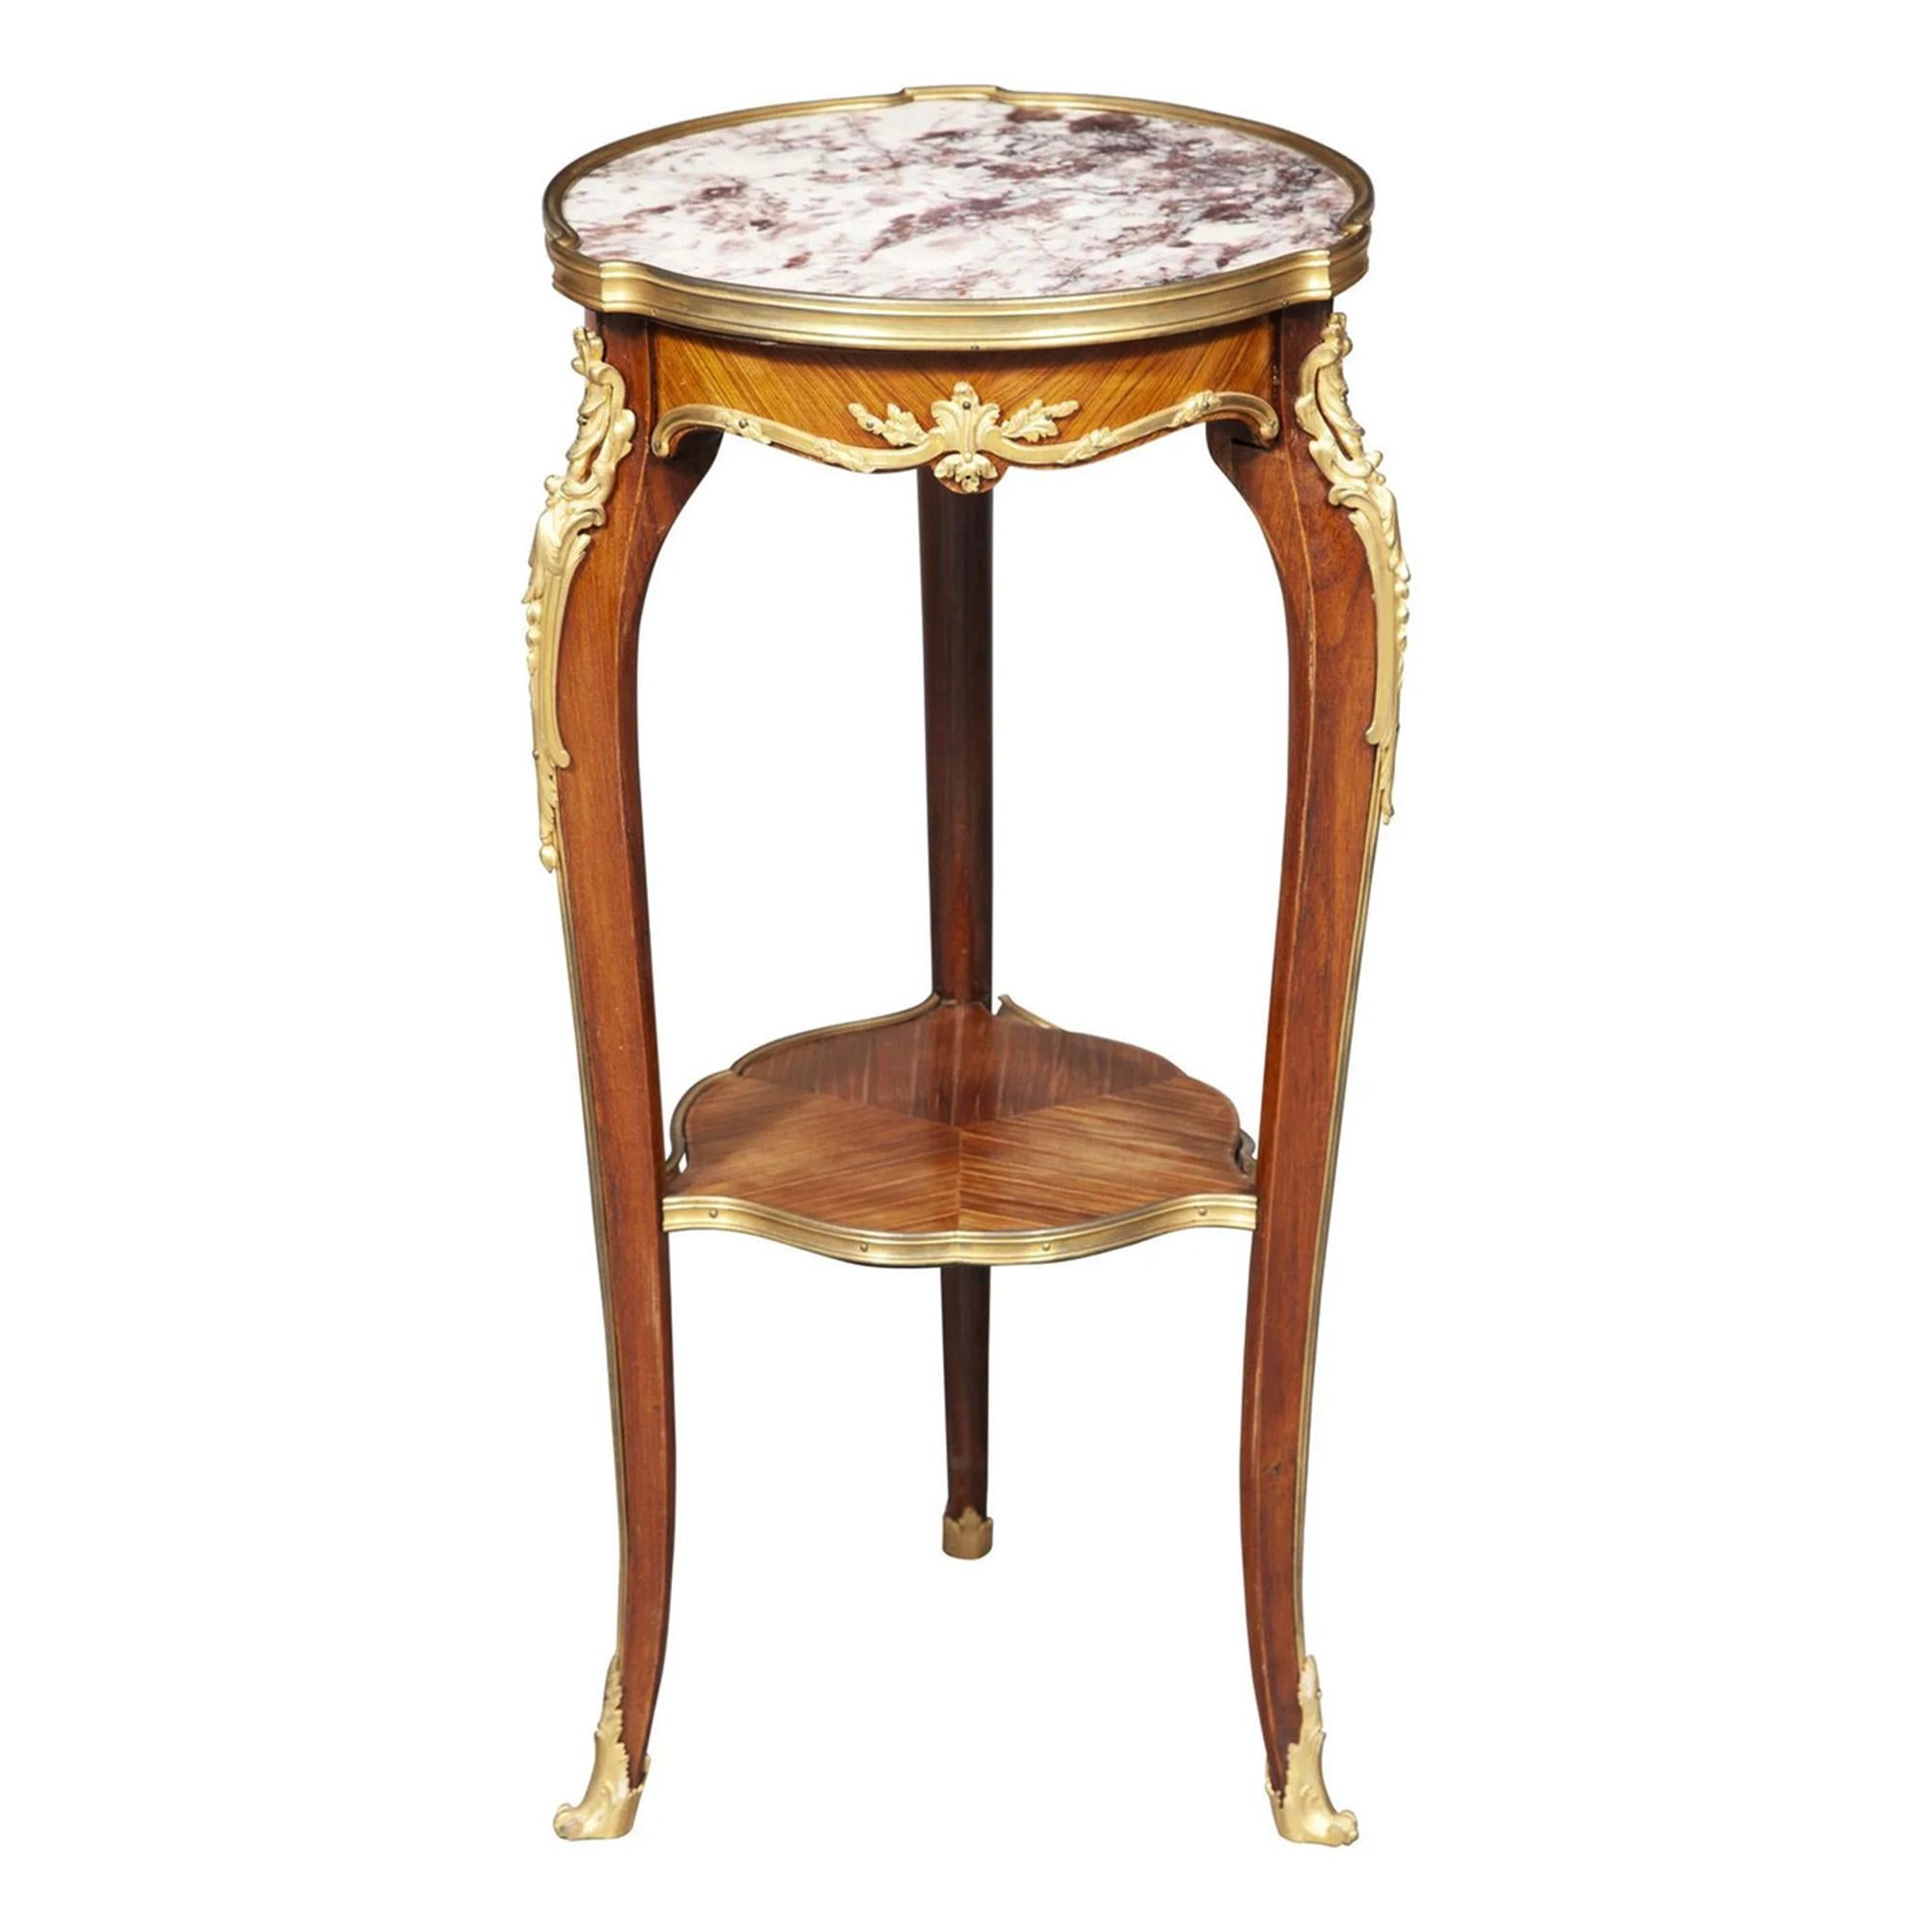 Louis XV style gilt-bronze mounted Kingwood occasional table

Born in Herdon, Germany, in 1849, Joseph Emmanuel Zwiener followed the tradition of some of the best ébnistes of the nineteenth century. He moved to Paris establishing a workshop at 12,